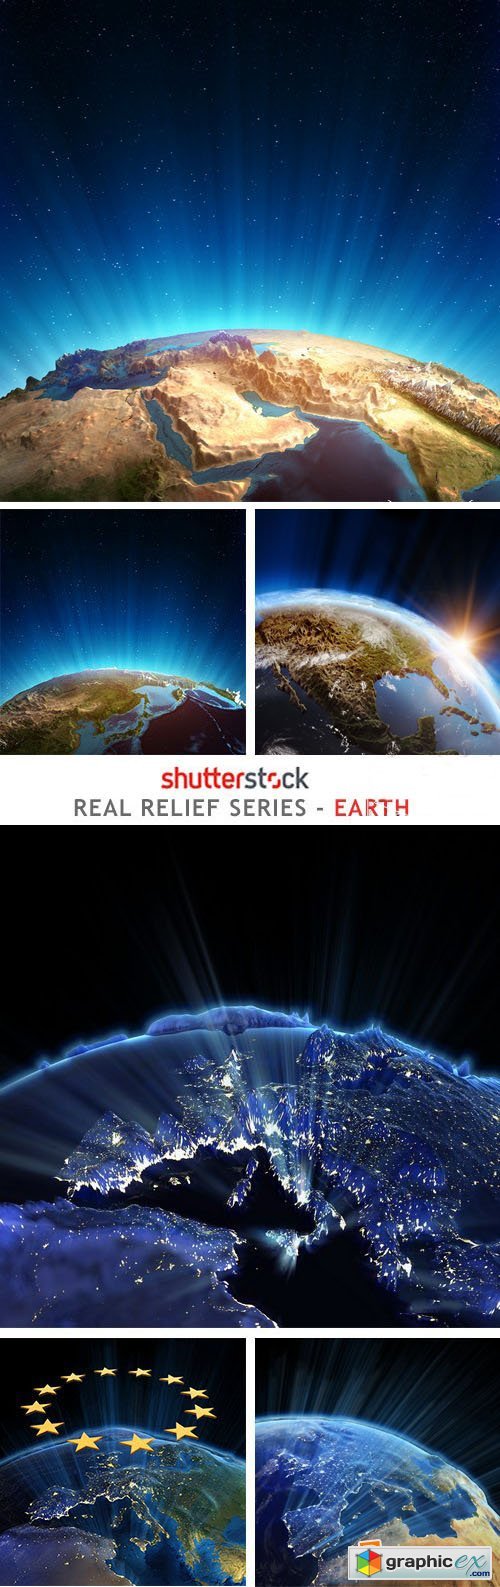 Real Relief Series - Earth - 24xJPG